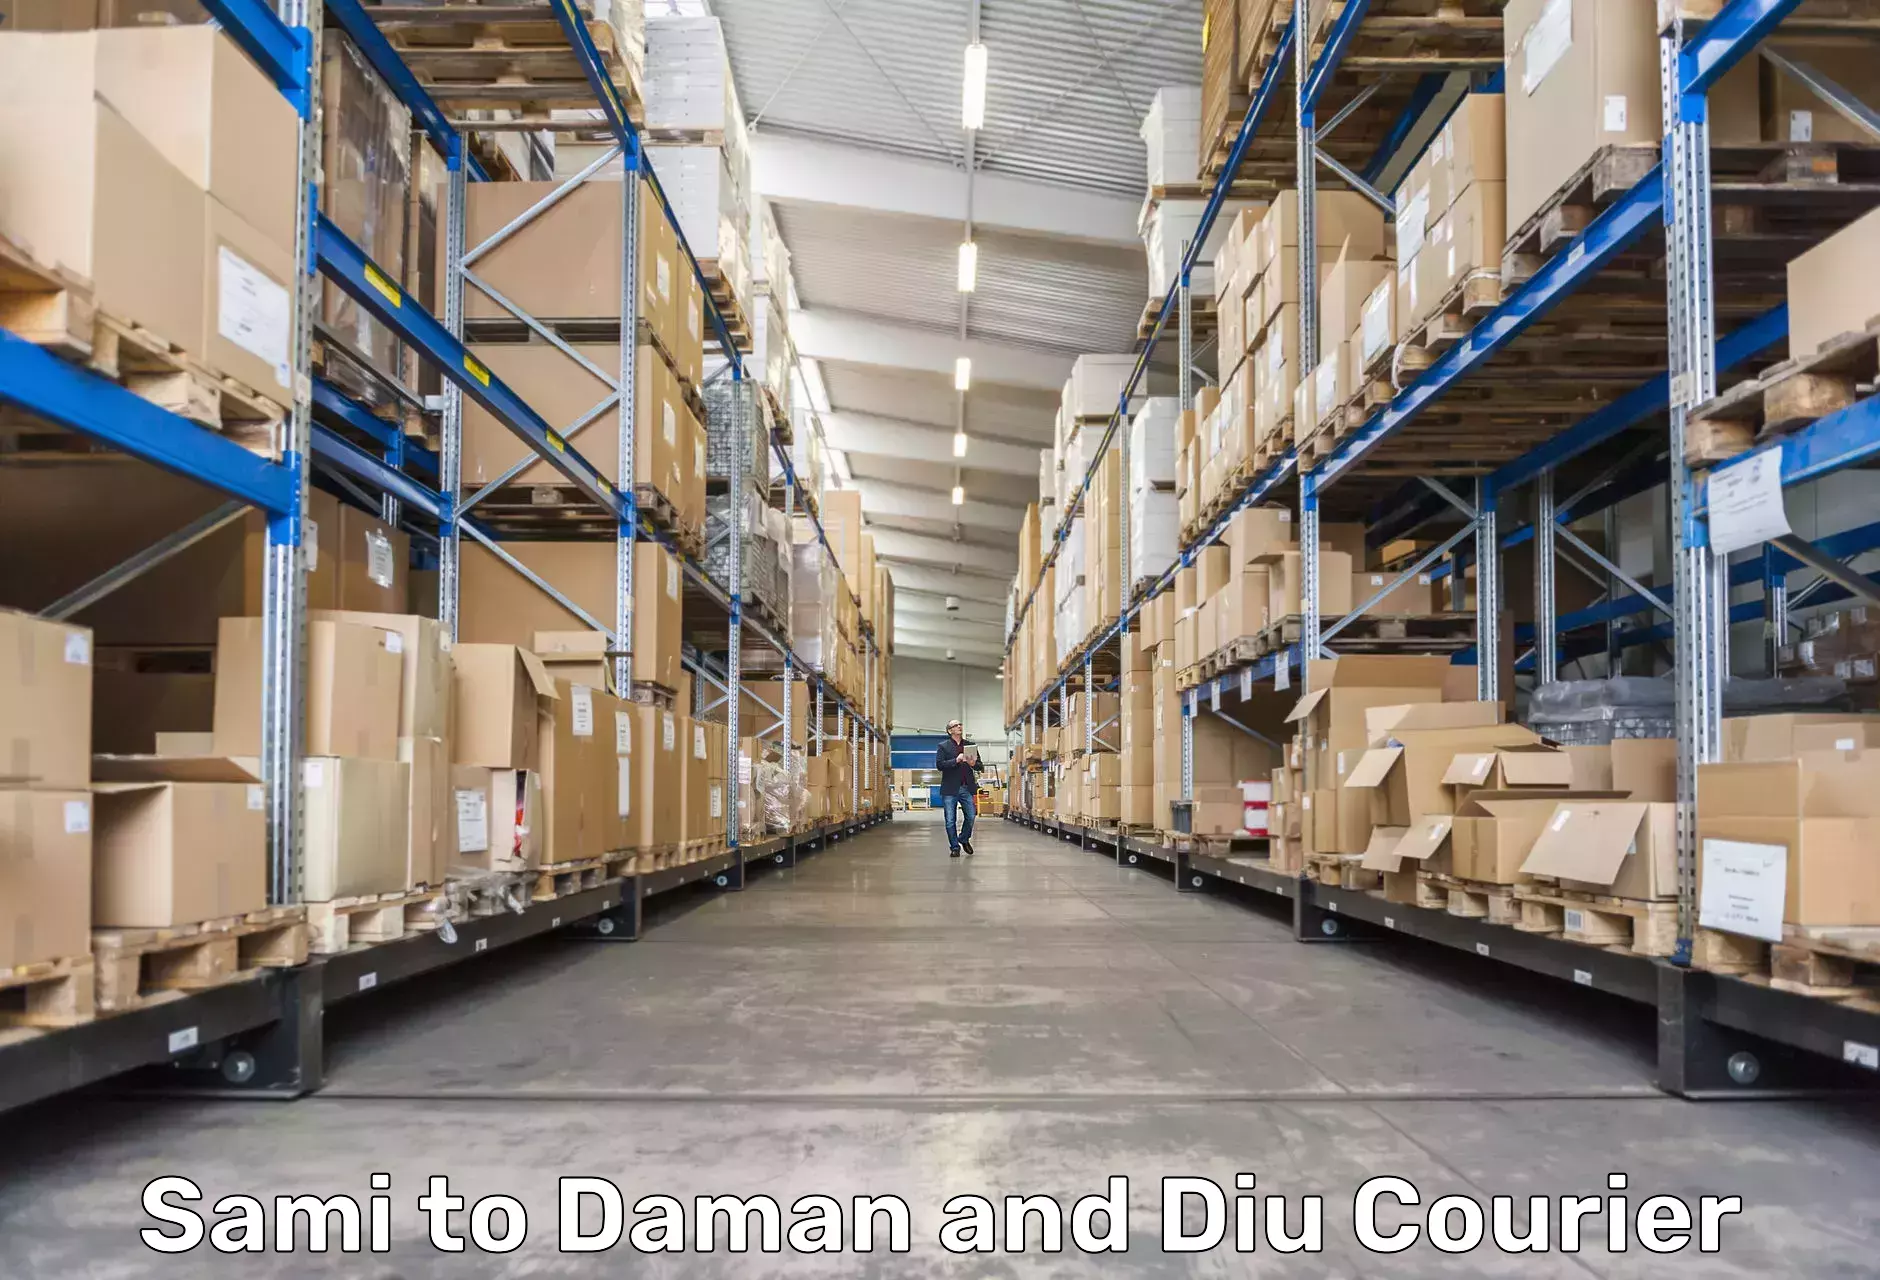 Business delivery service Sami to Daman